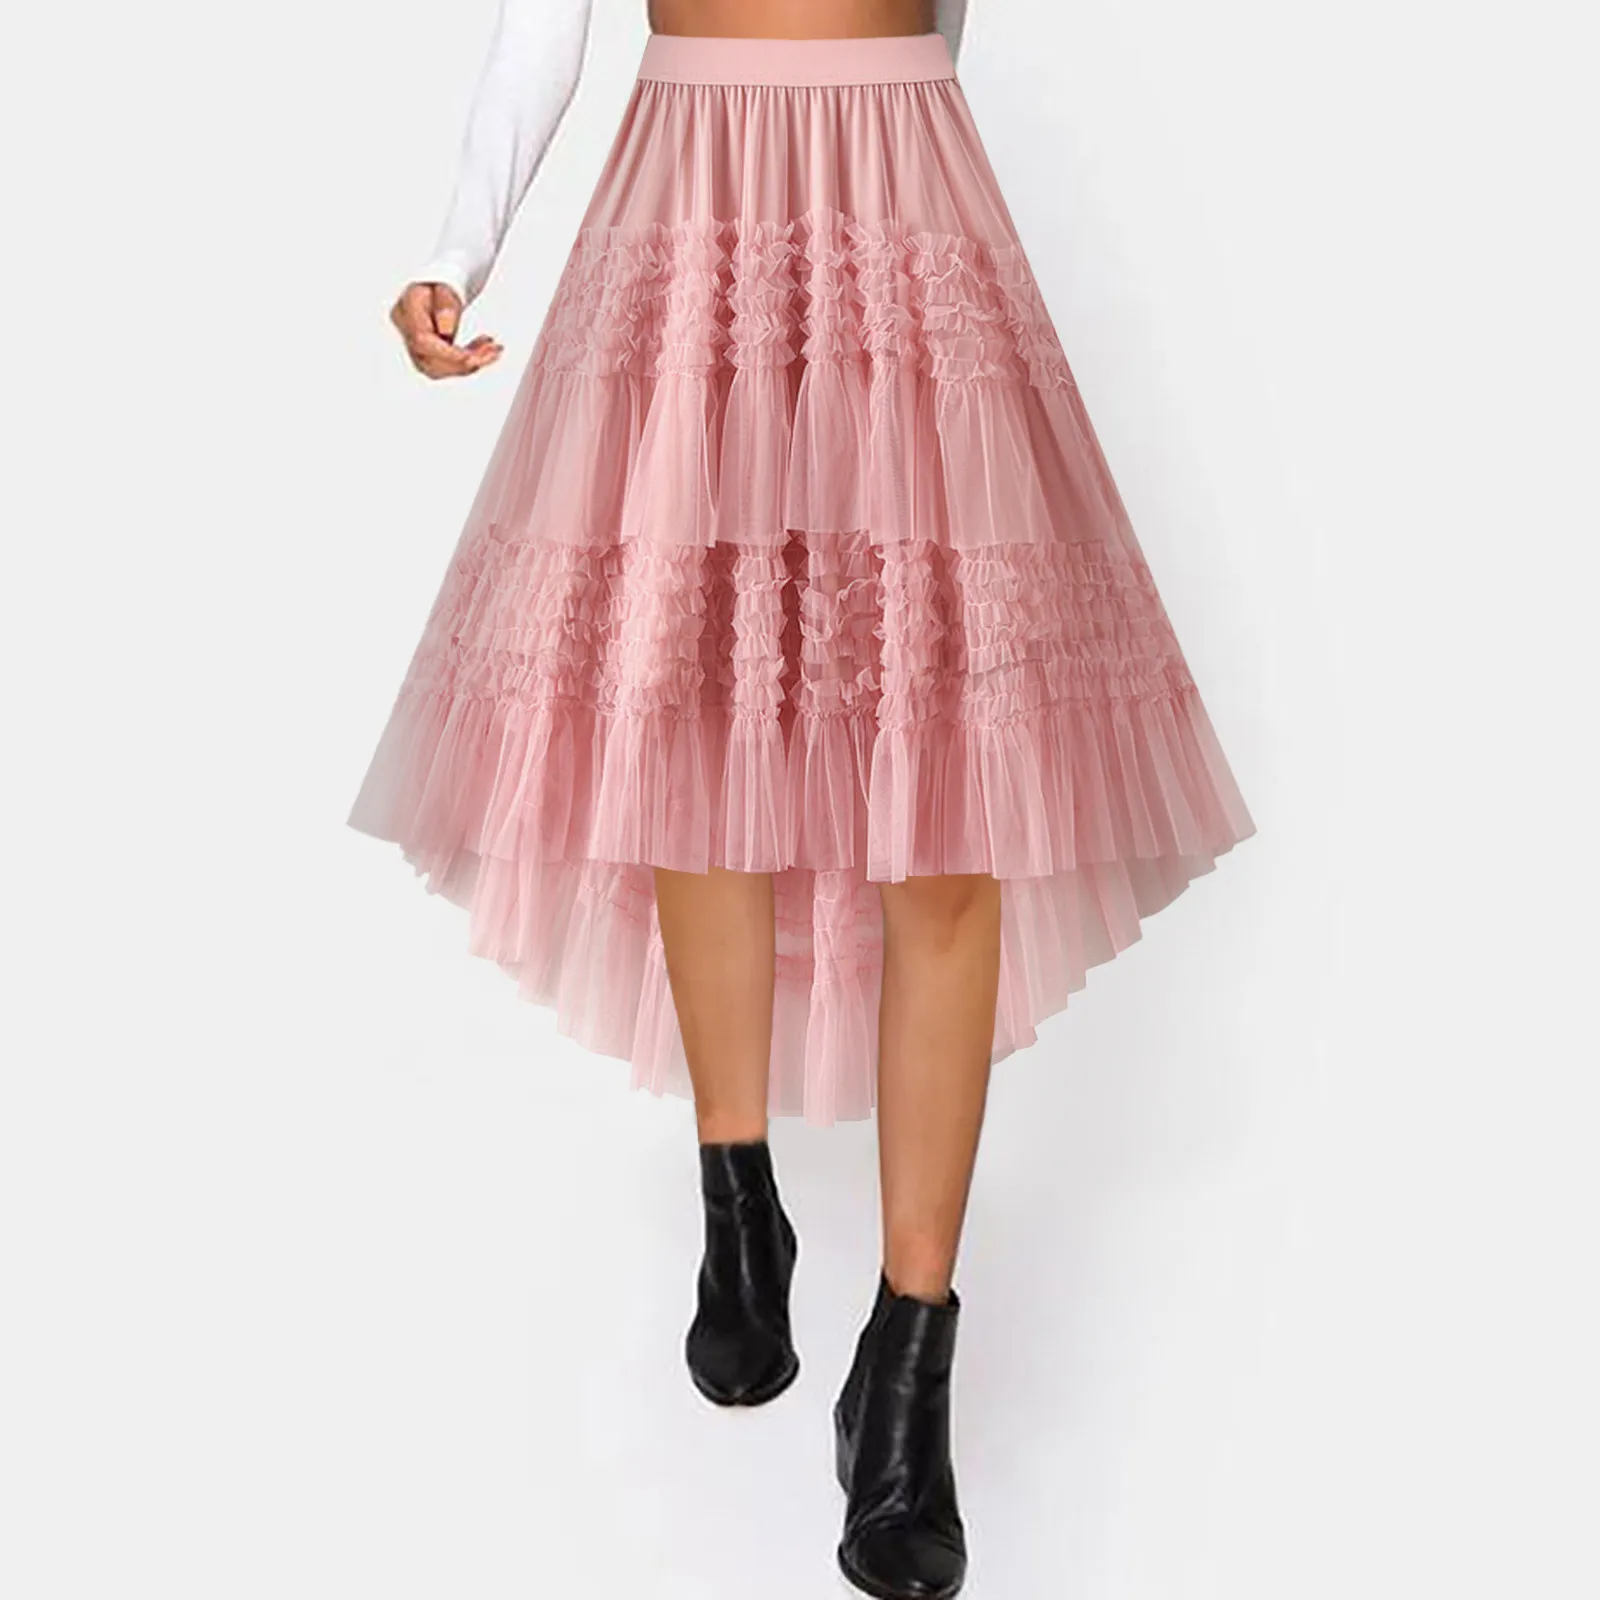 

Women Ruffles Tiered Skirt Dance Party High Waisted Tulle Skirt Holiday Party Costume Puffy Skirts